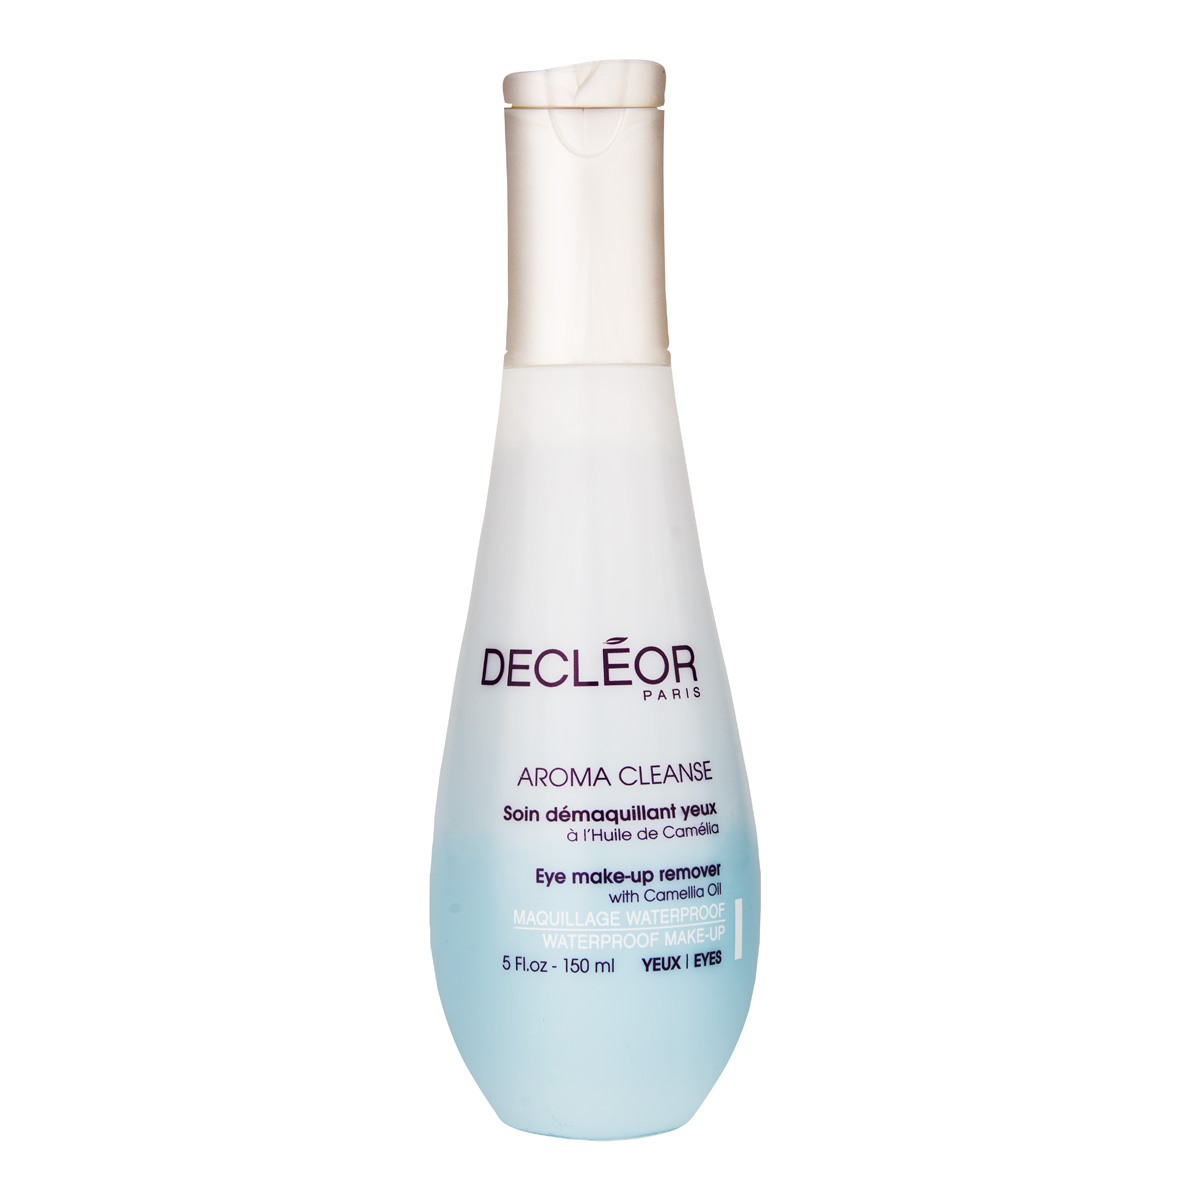 Decleor Aroma Cleanse Eye Makeup Remover With Camellia Oil Waterproof  Make-Up 150ml - McGrane's Pharmacy